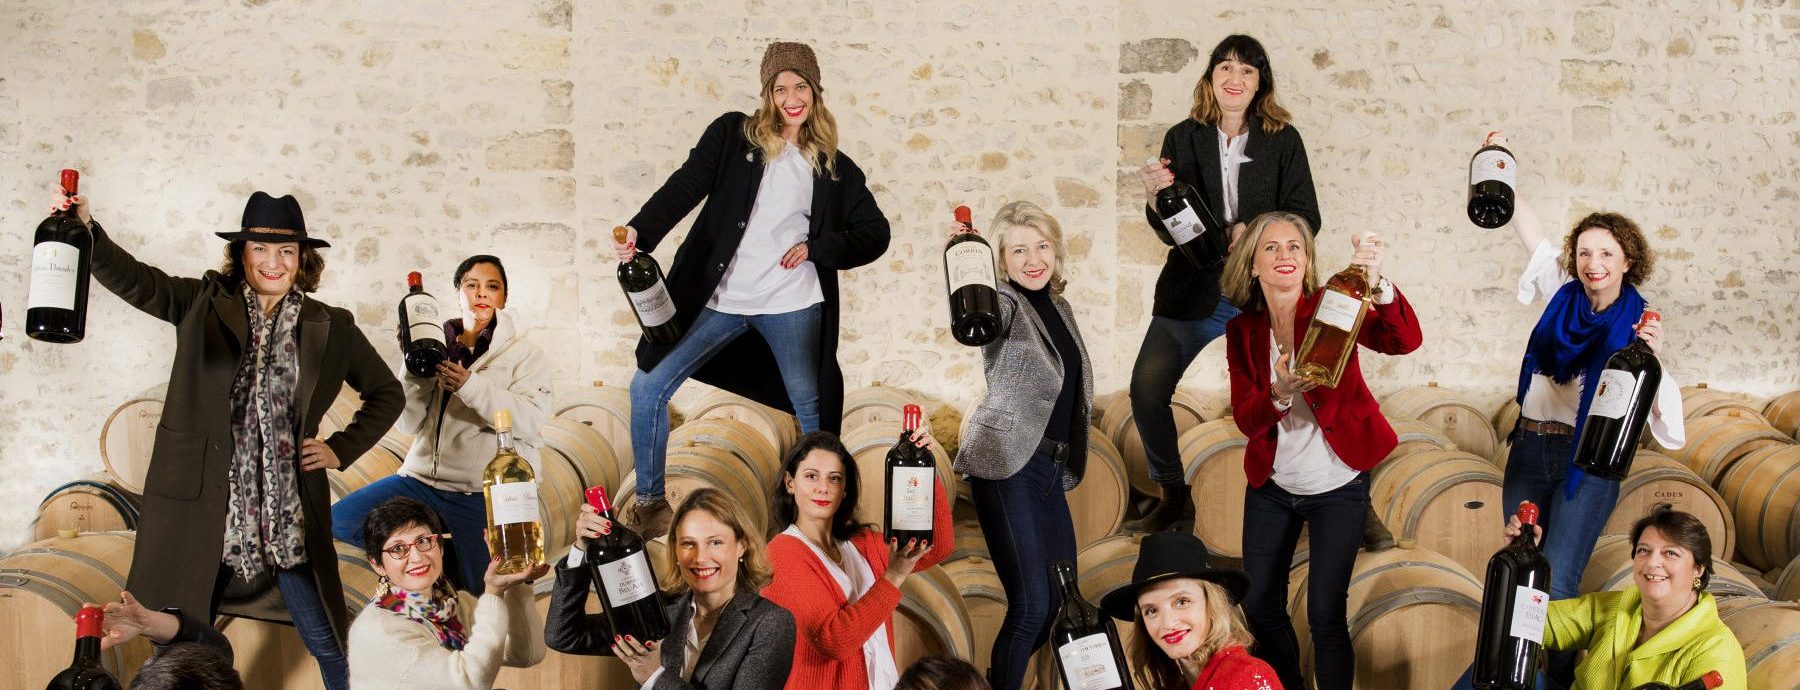 Where are the Women in the Wine?